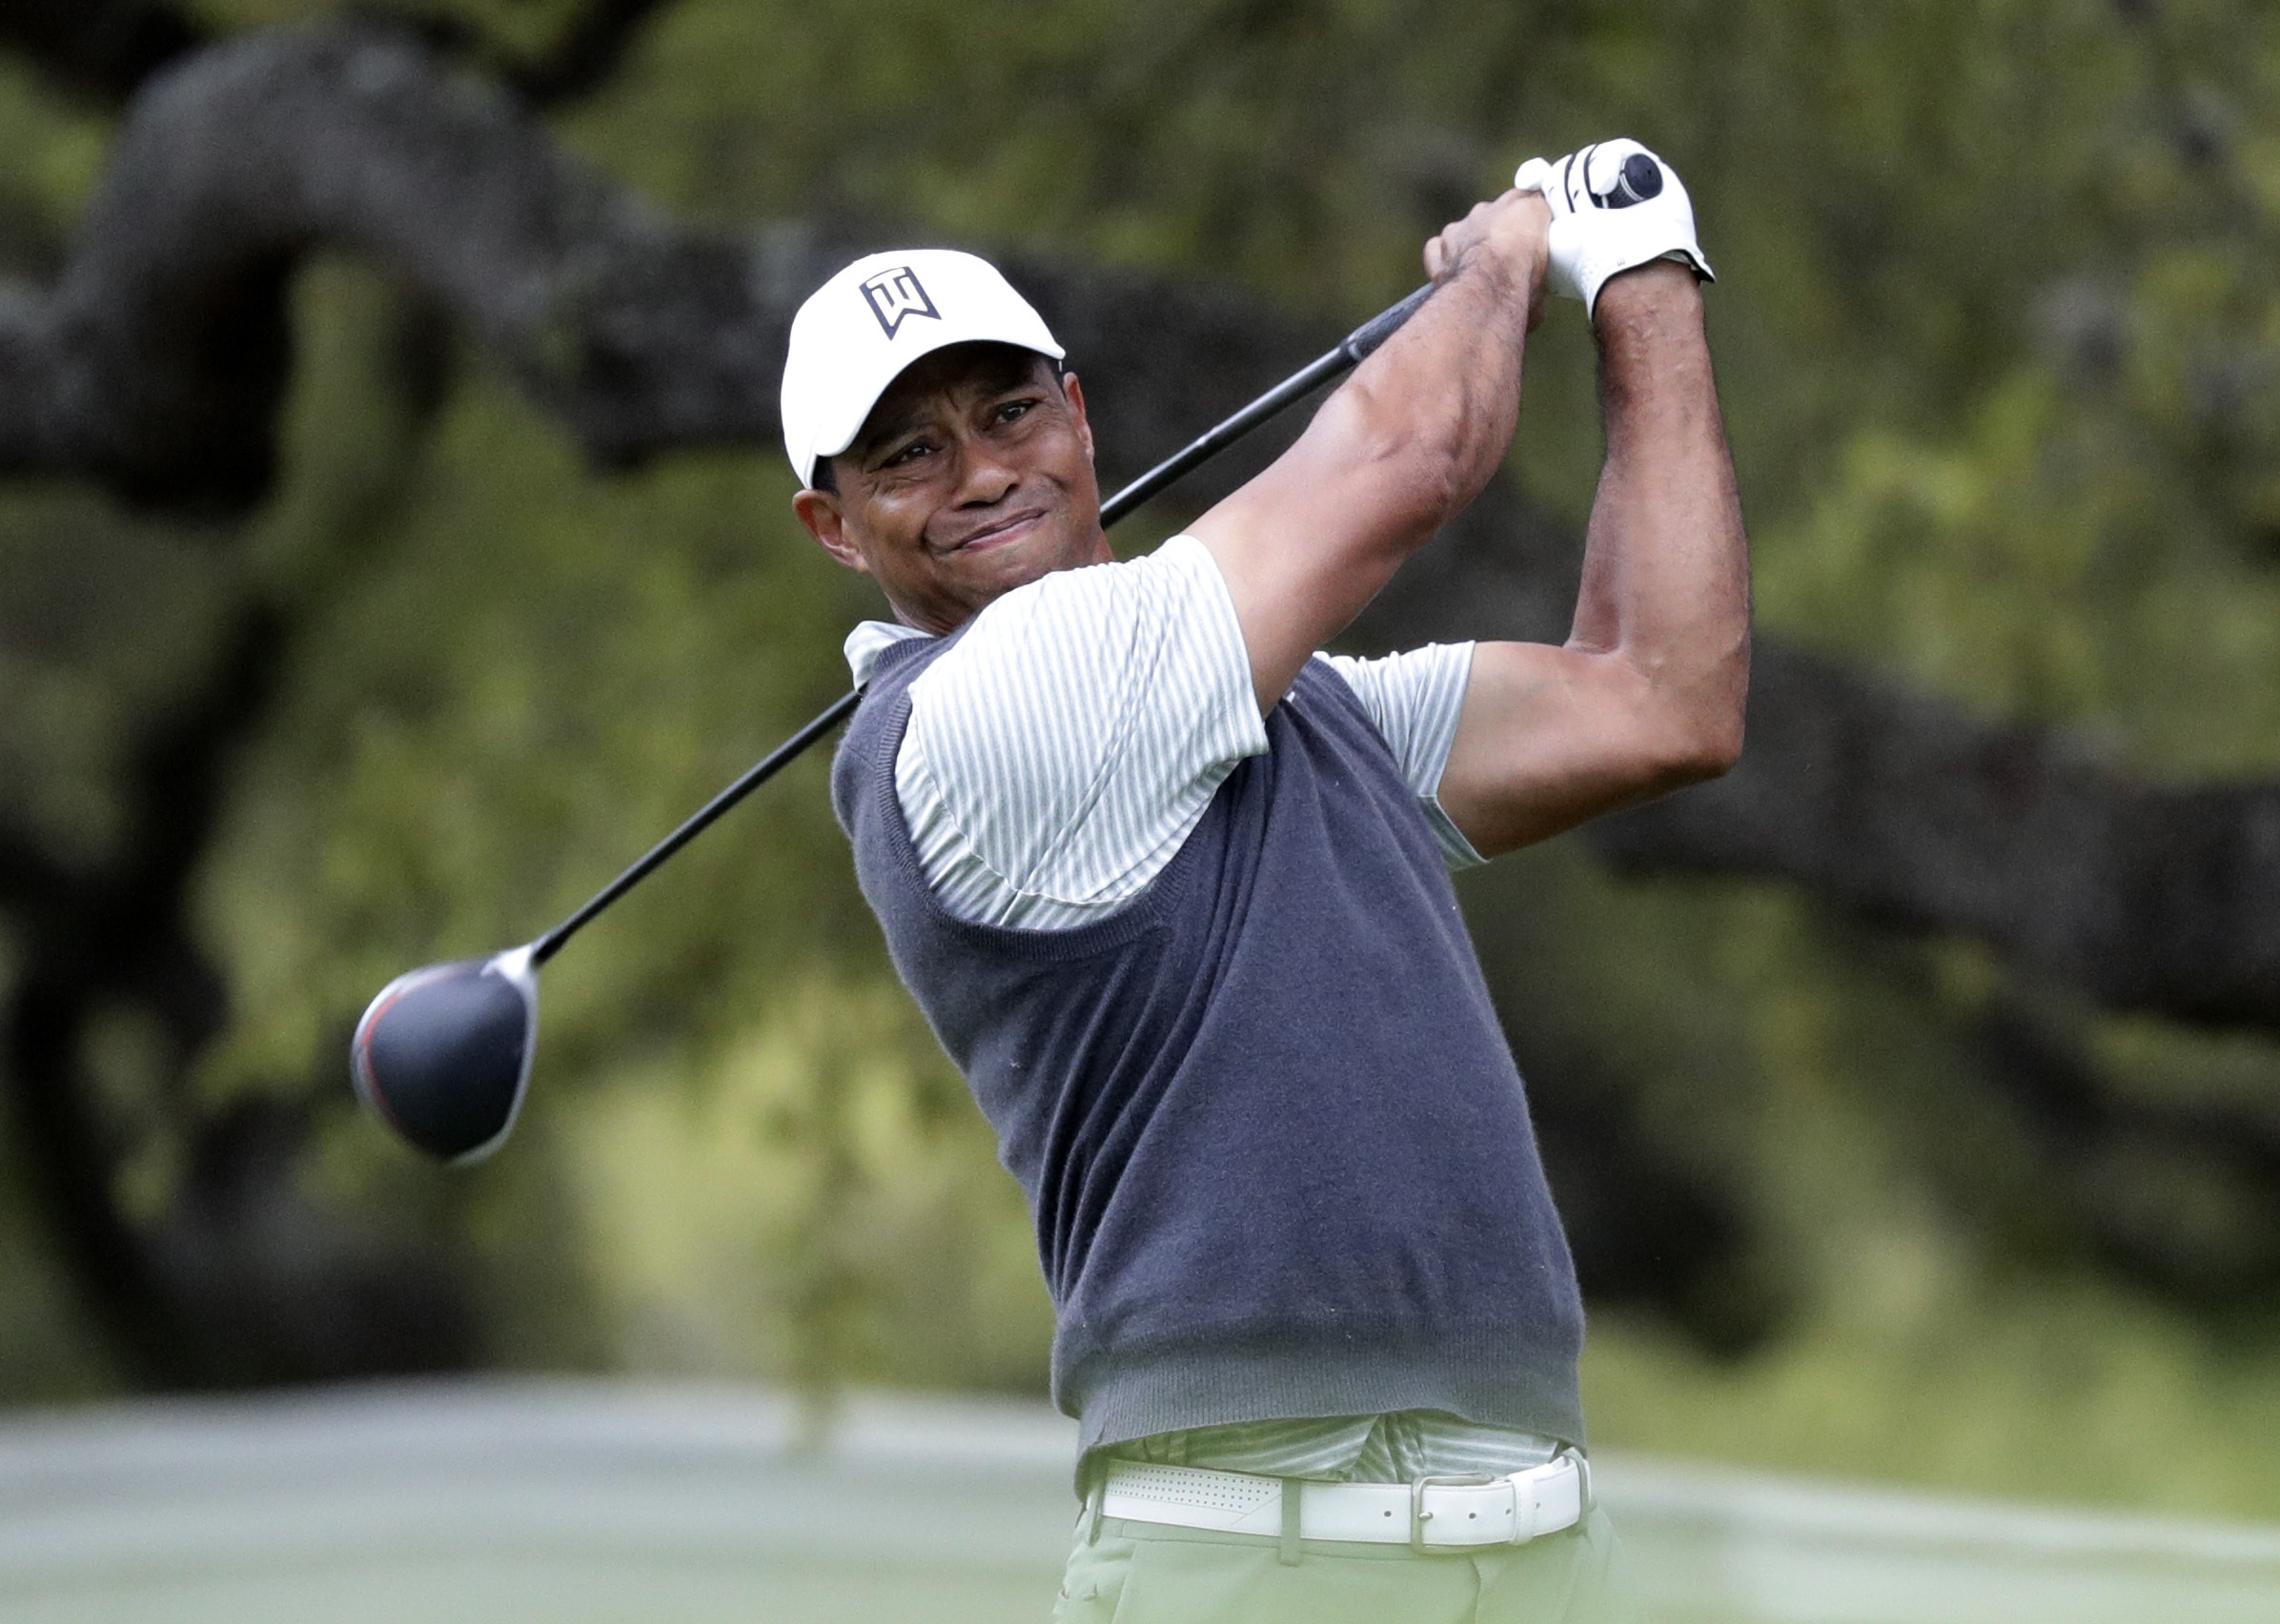 Woods advances at Match Play after McIlroy meltdown